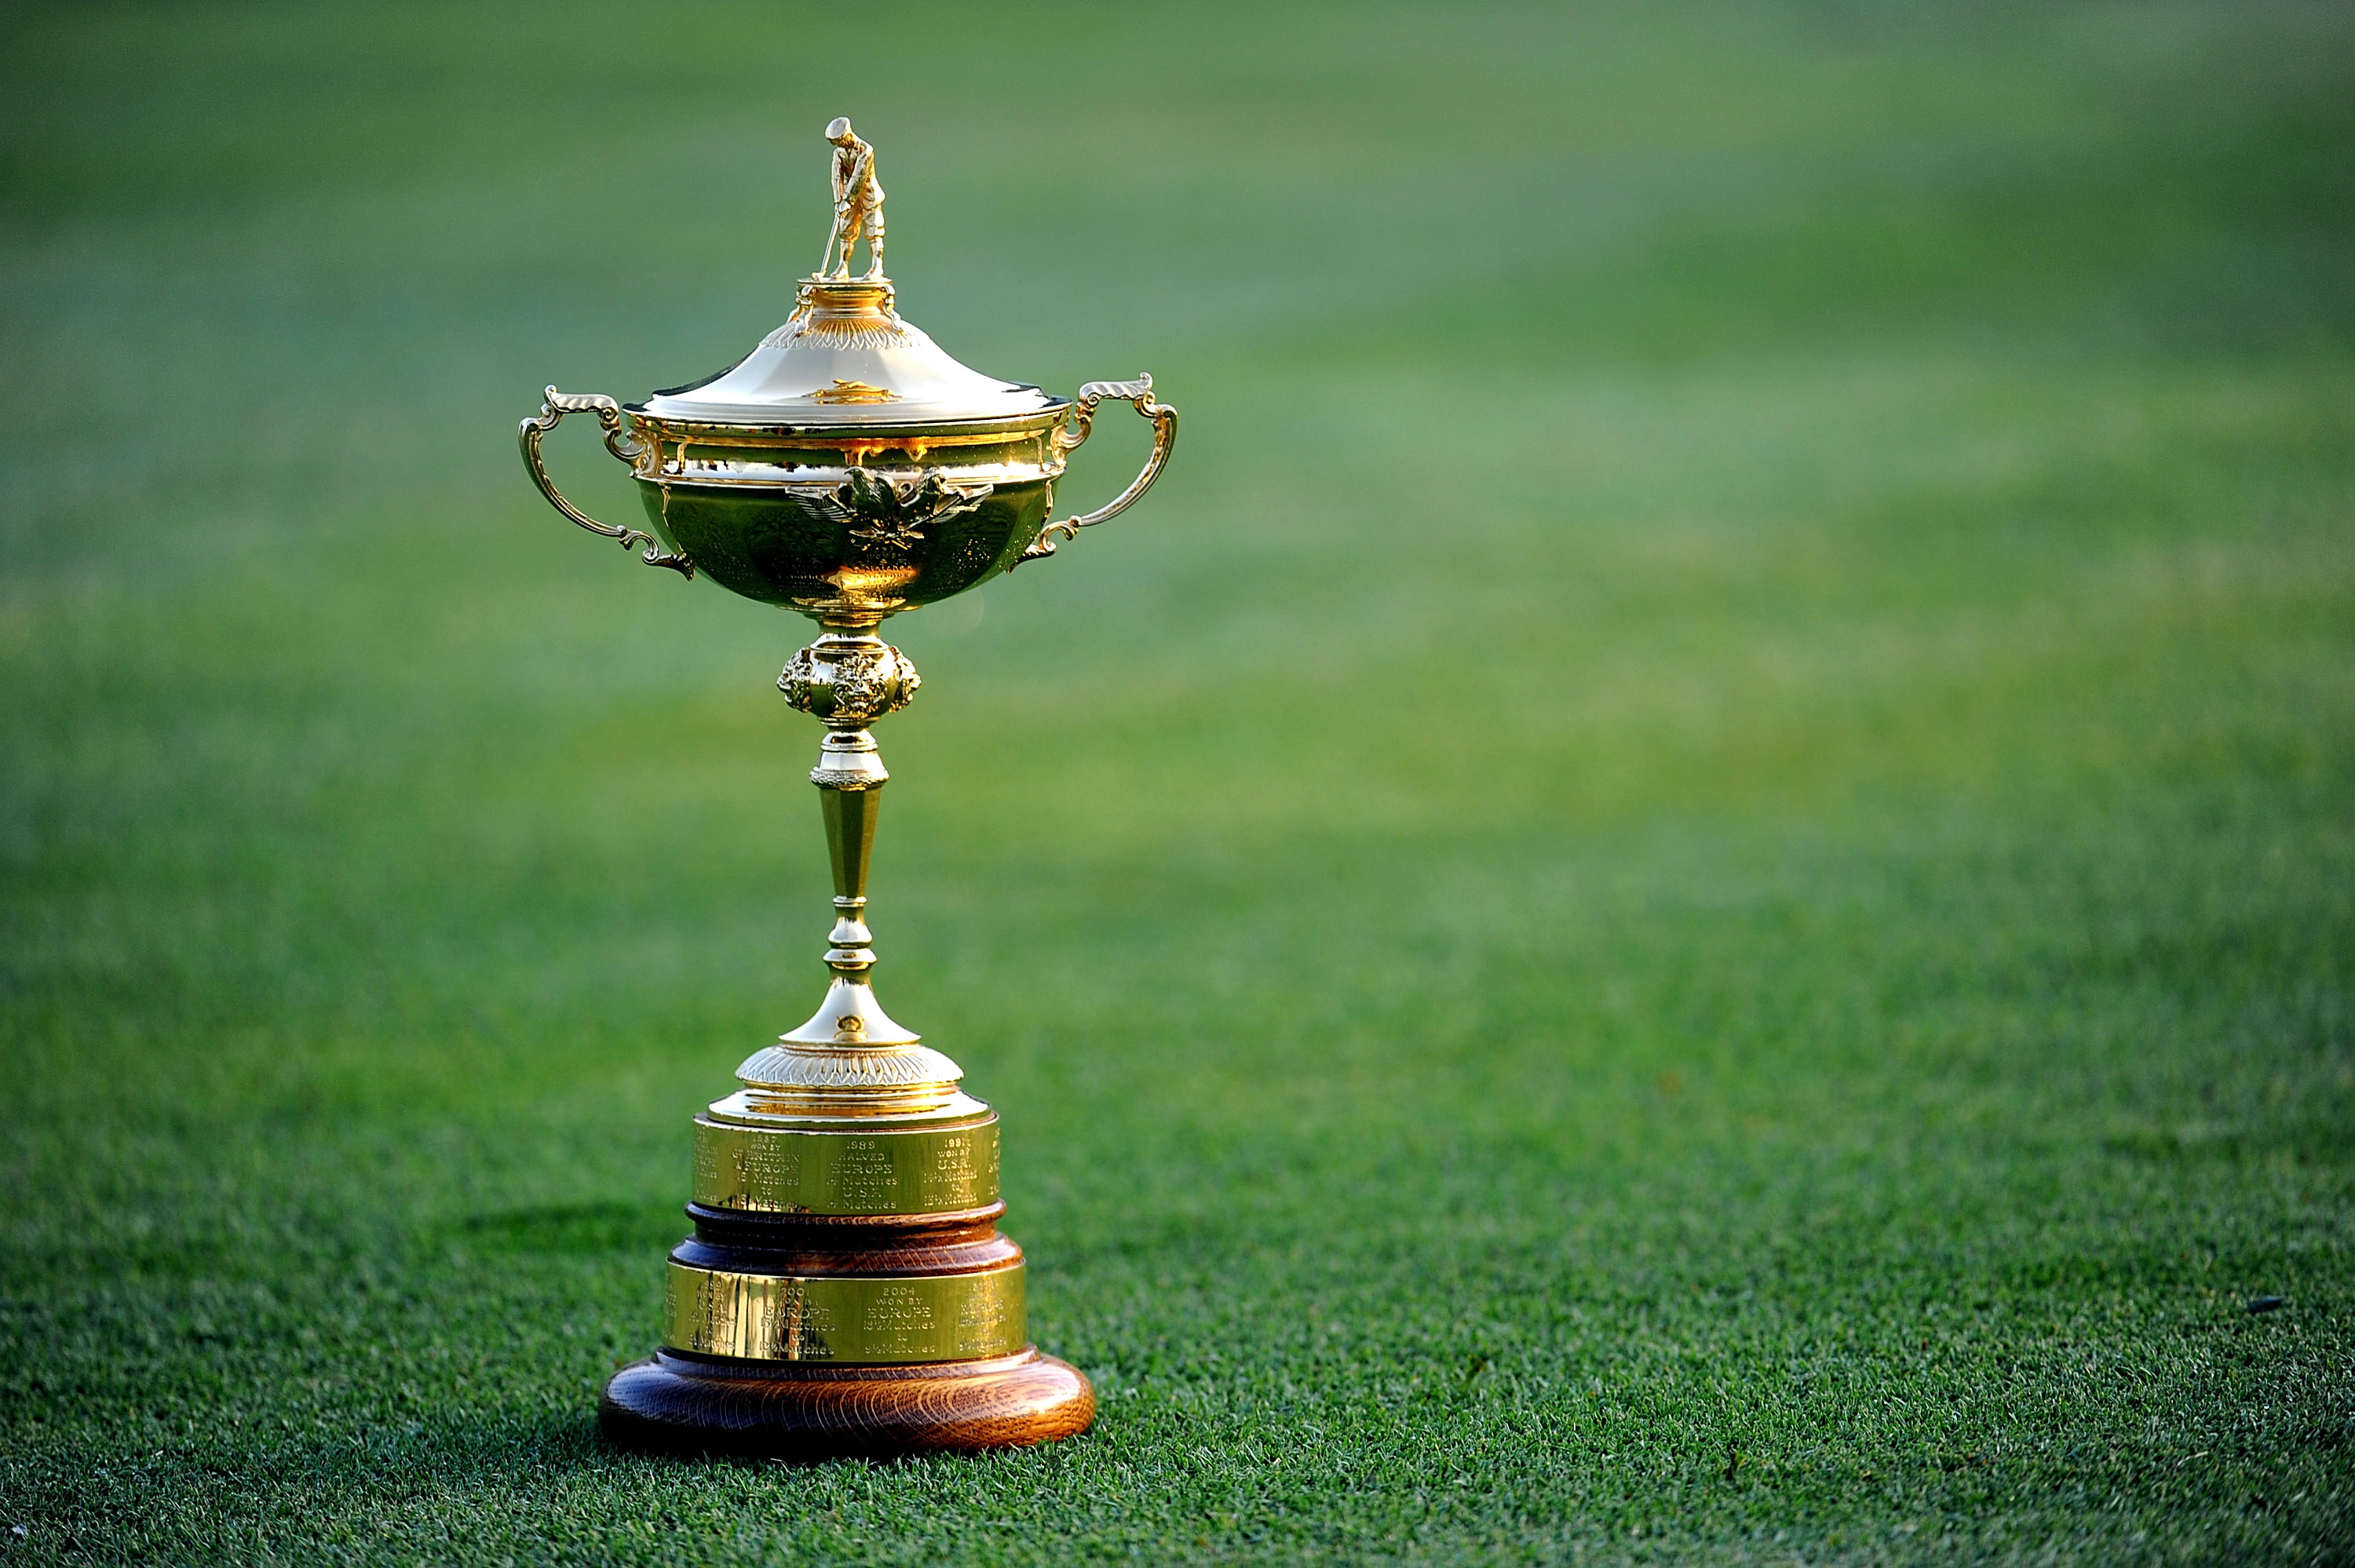 Ryder Cup and Presidents Cup Rescheduled for 2021 and 2022 Respectively